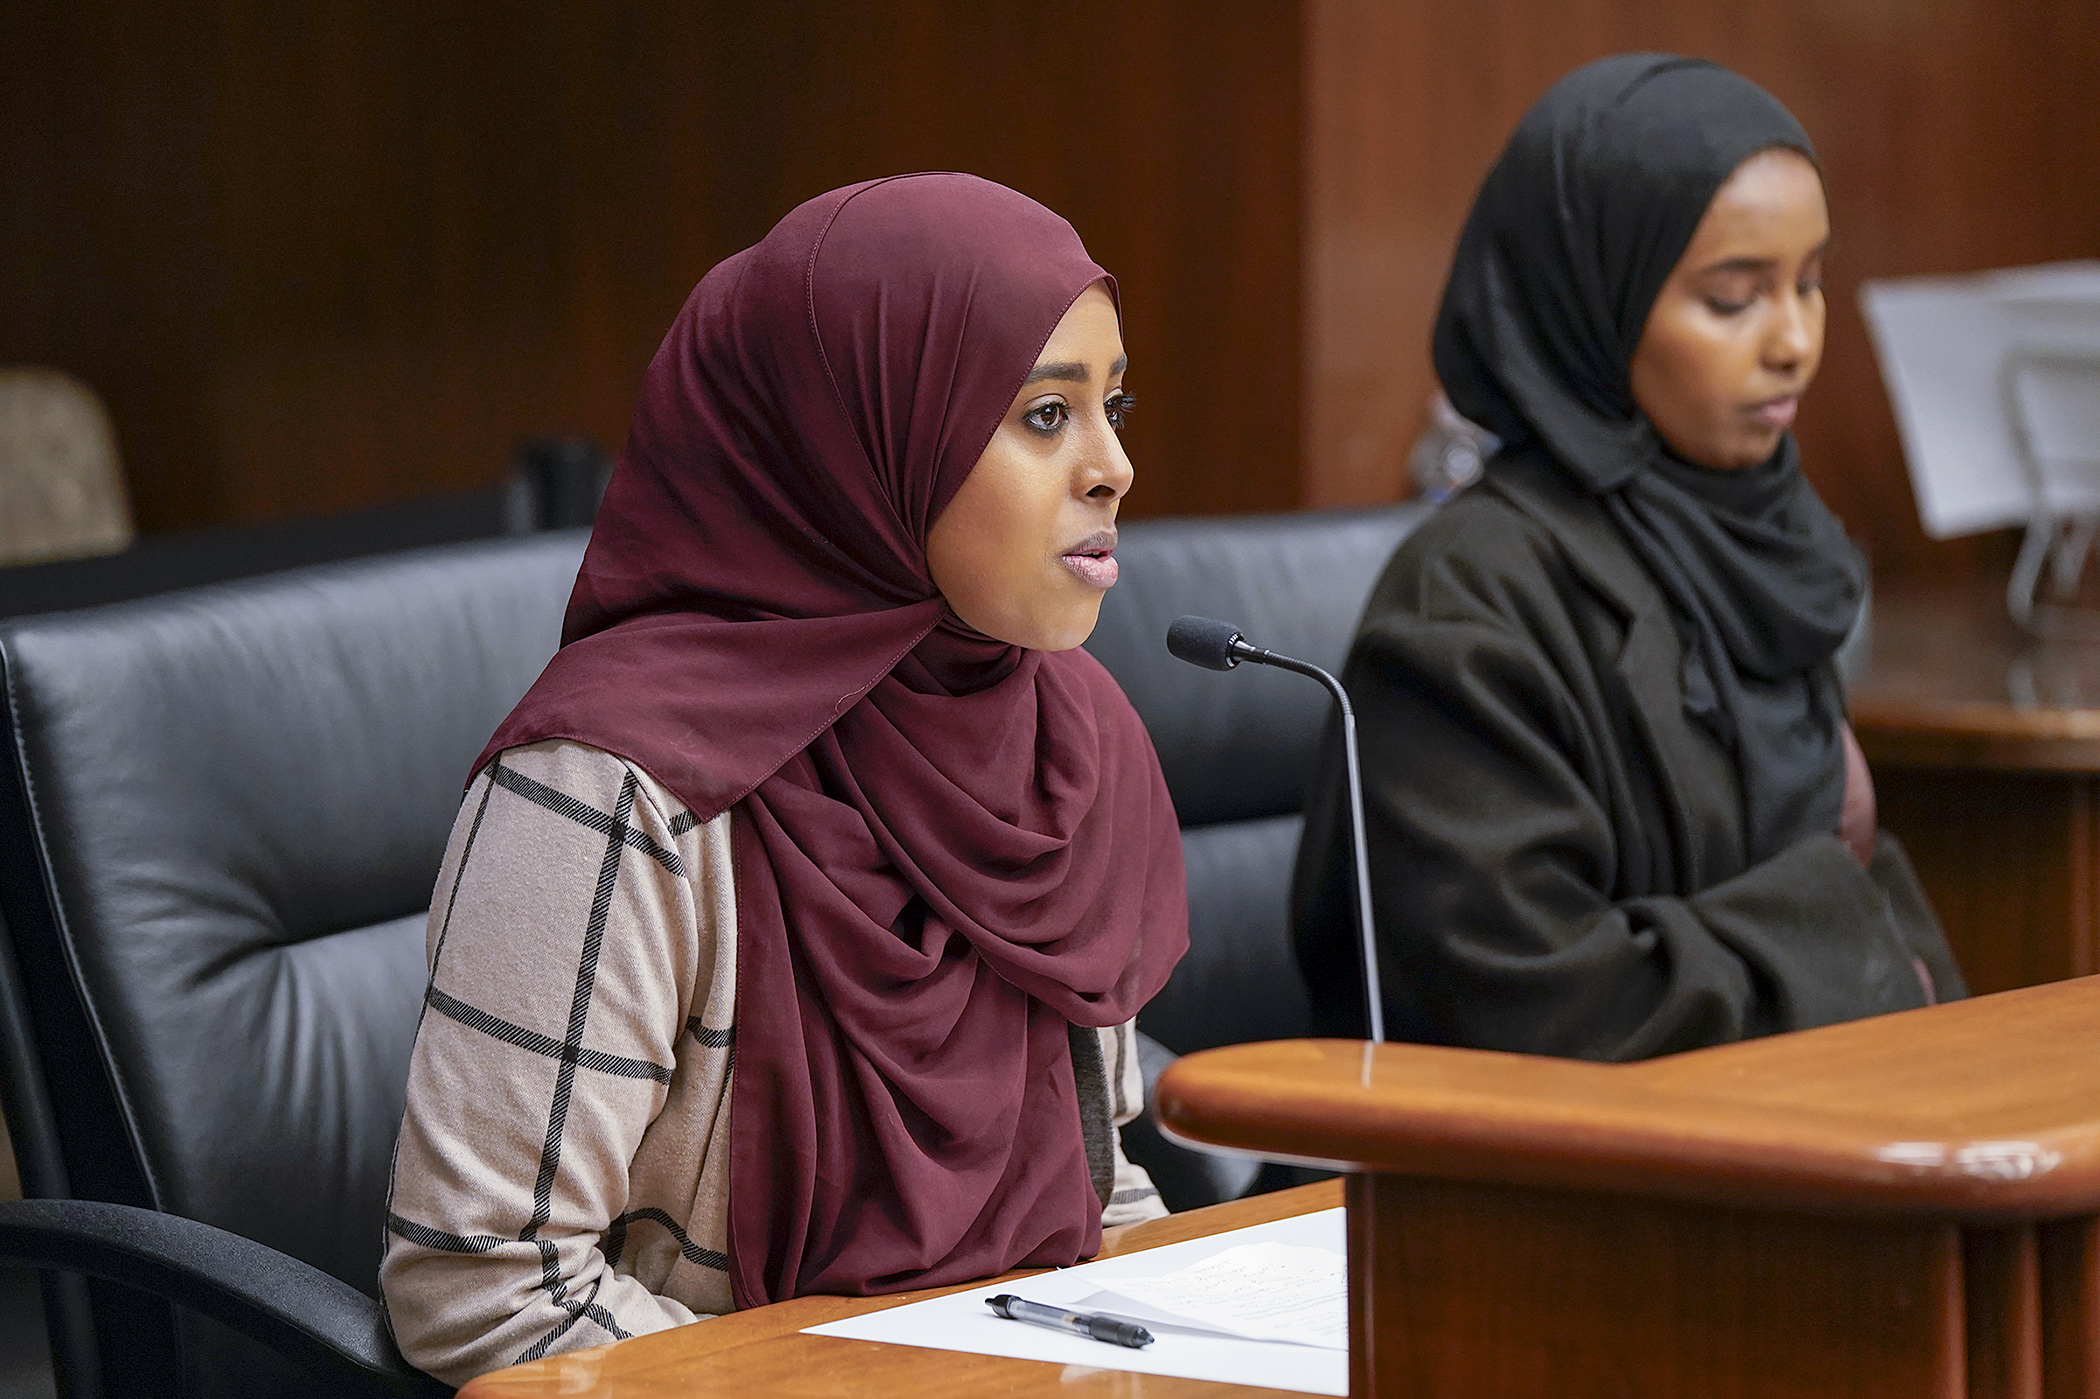 Nadira Mohamed, left, testifies before the House Workforce Development Finance and Policy Committee April 3 in support of HF5065 to provide funding for the Minnesota STEM Project and the Milestone Tech Program. Kawthar Mohamud also testified. (Photo by Michele Jokinen)